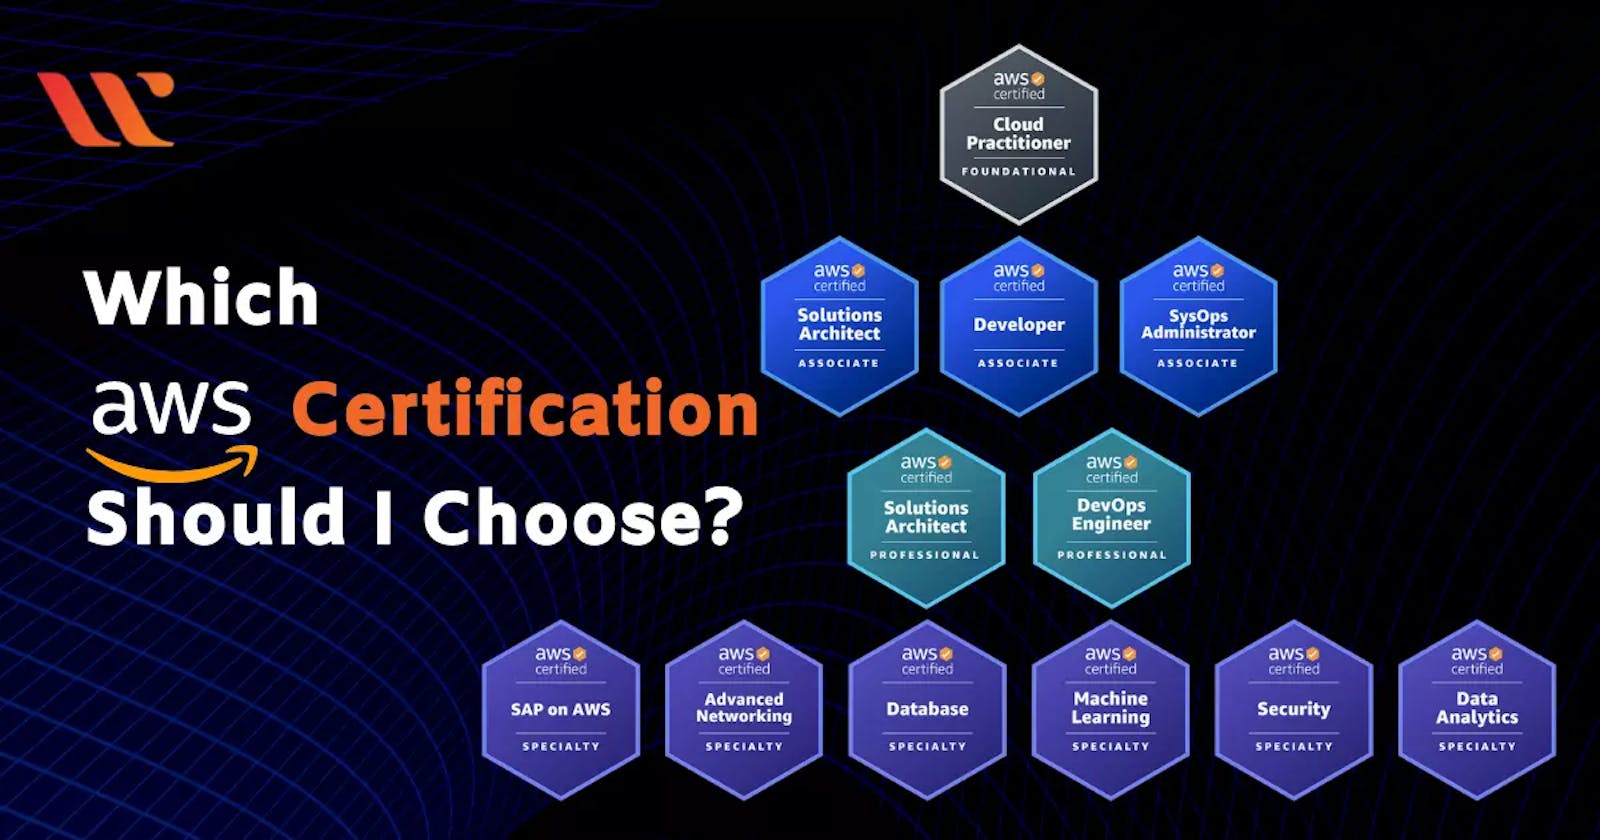 All About Amazon Web Services (AWS) Certificates